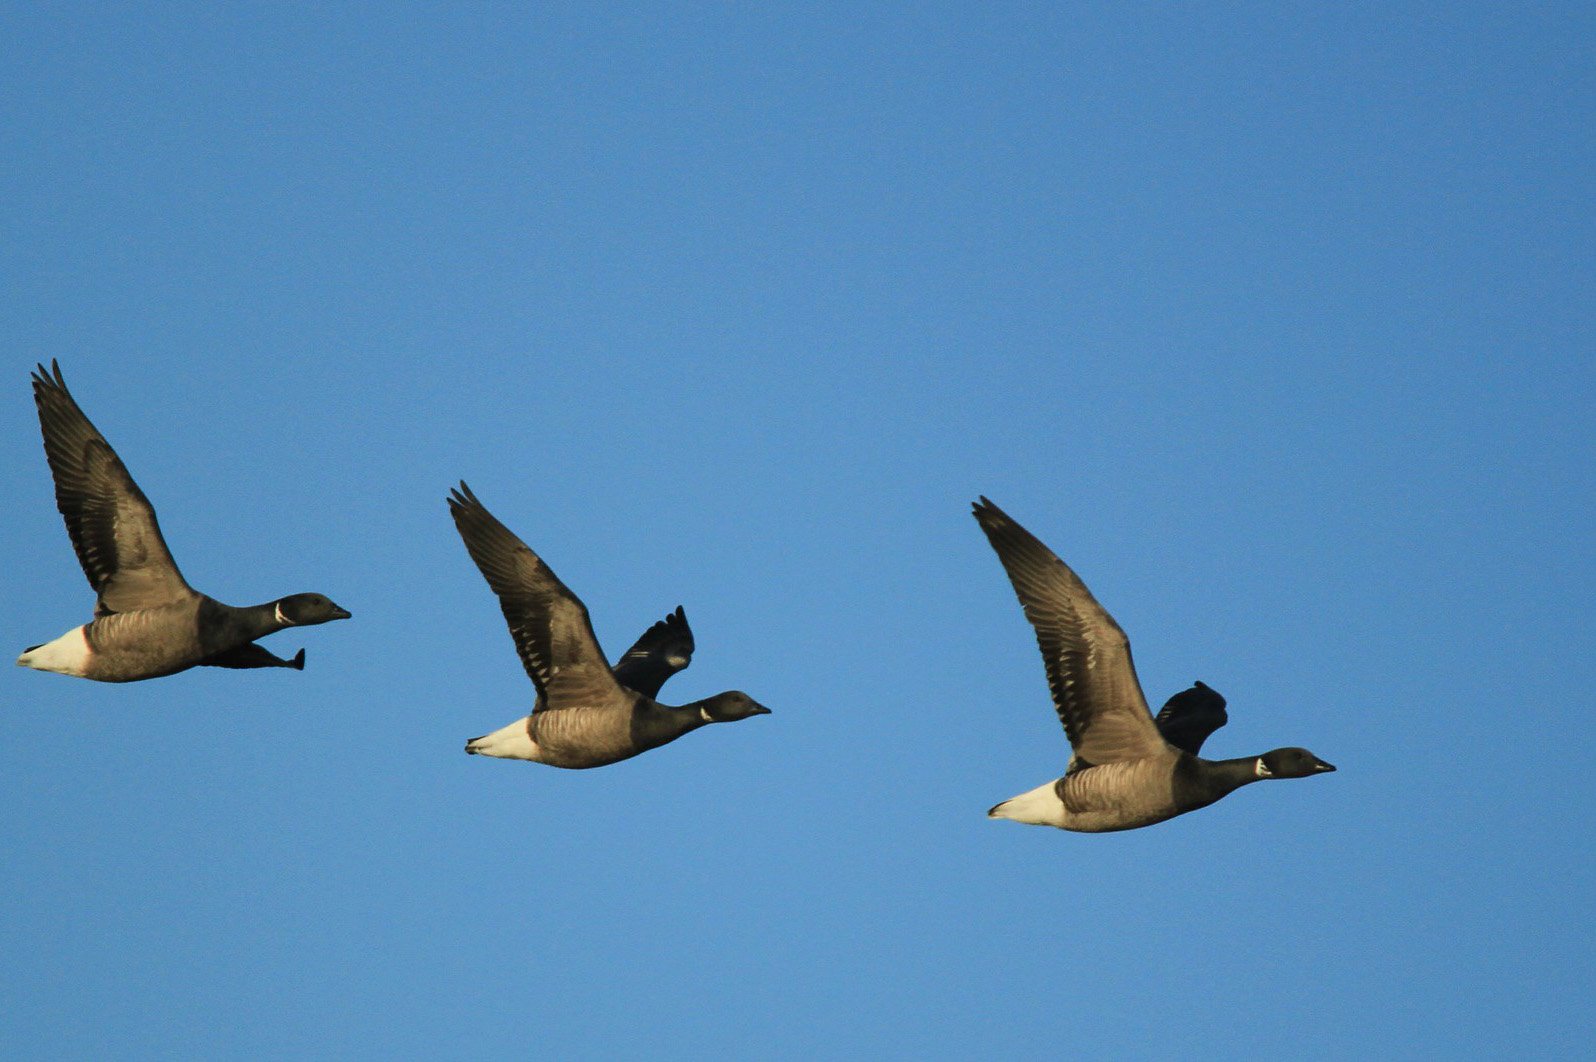 The volatility of seasons is affecting the breeding patterns of Brent geese, a migratory bird species. Image credit - Flickr/milo bostock, licensed under CC BY 2.0